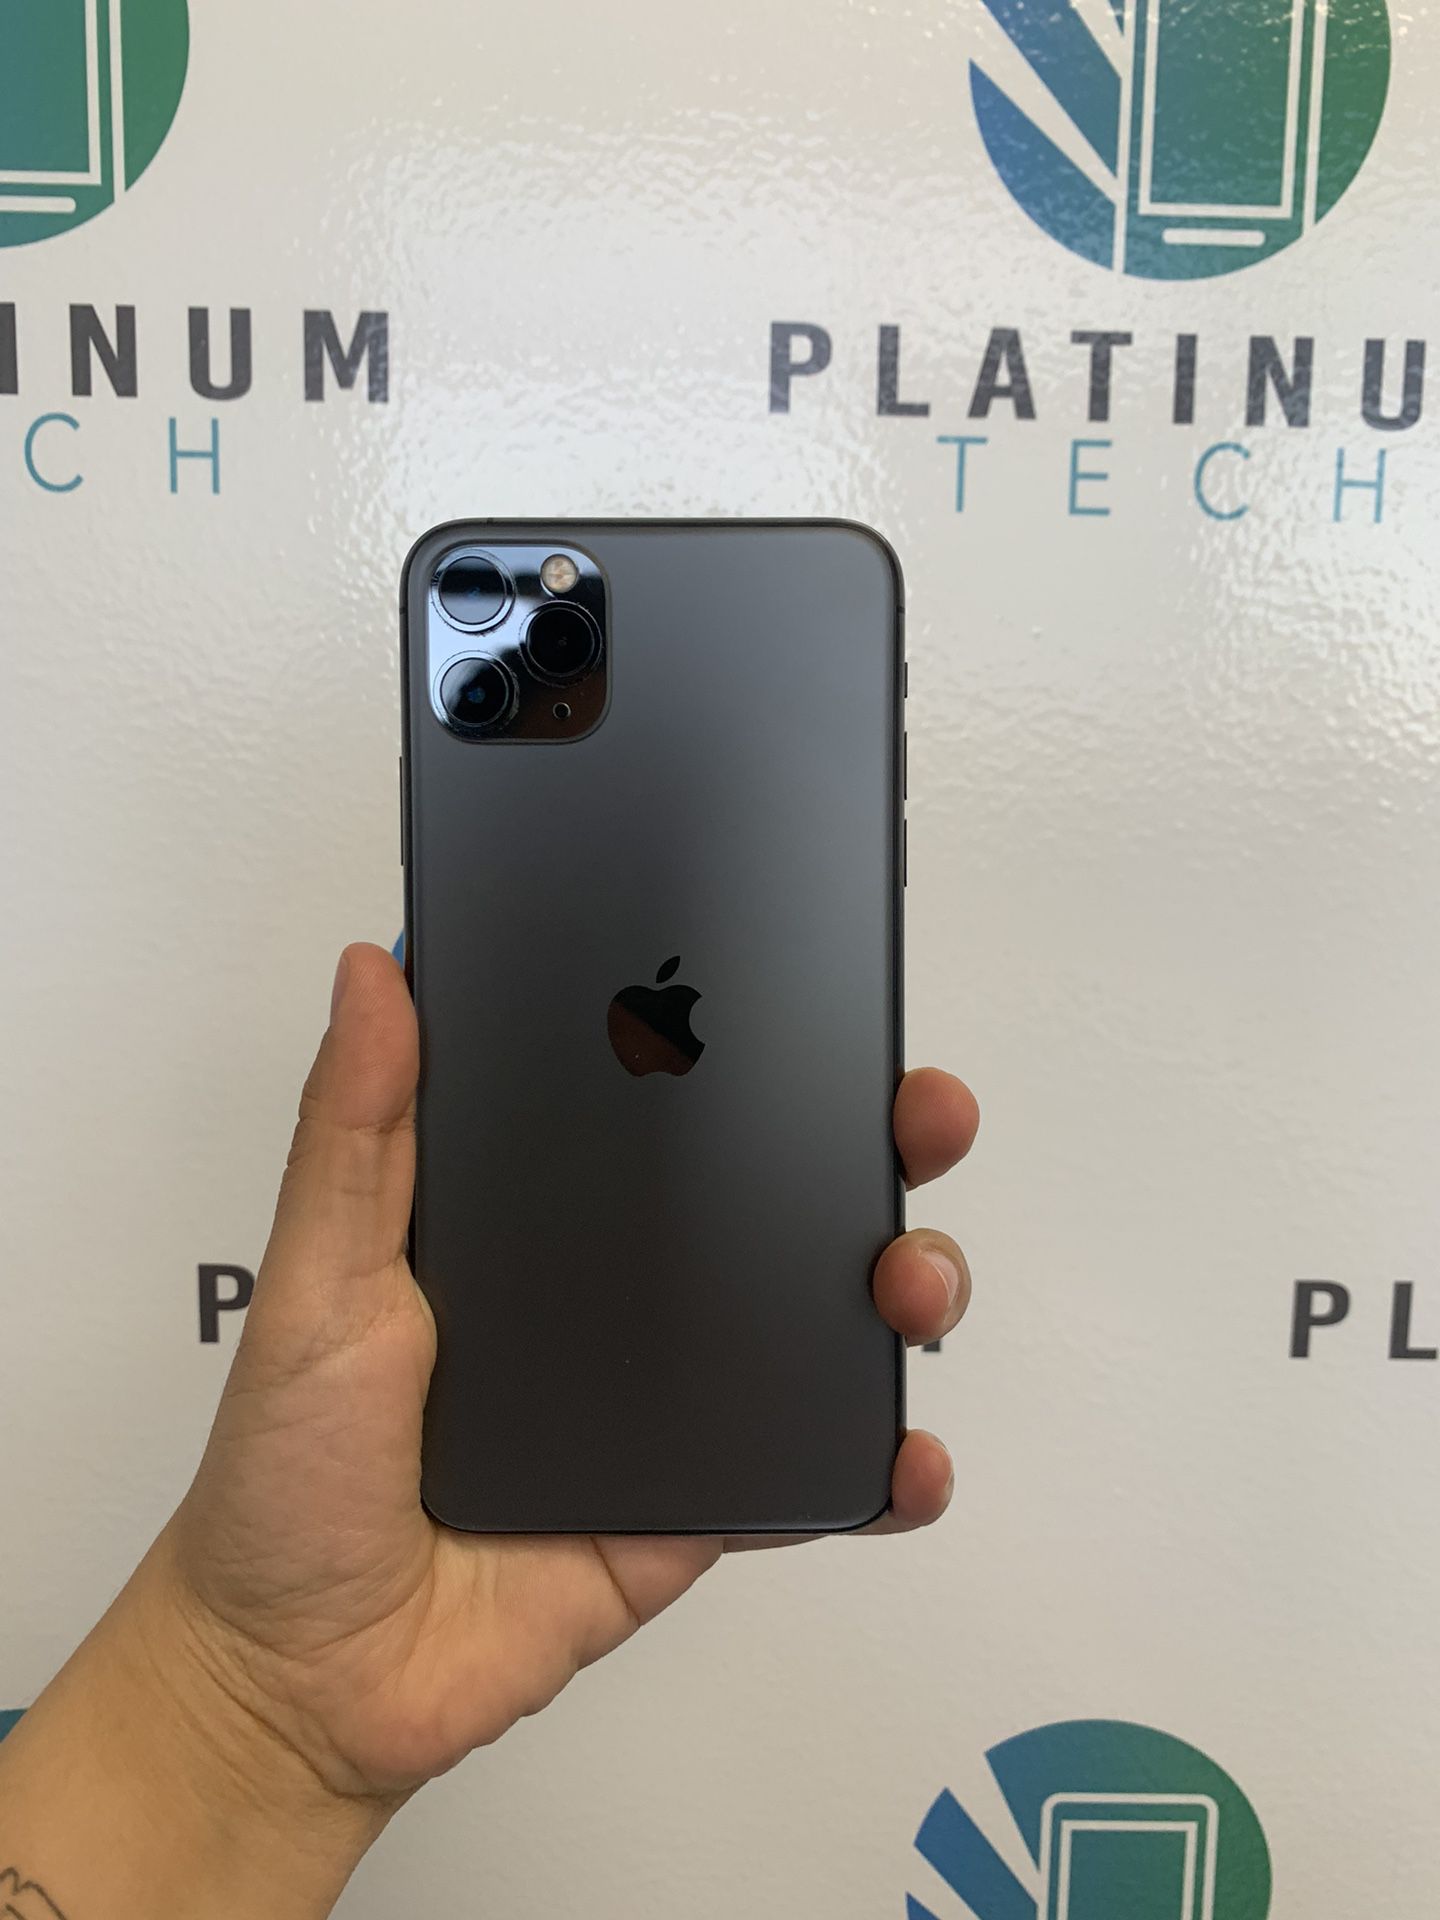 ⚫️☑️ iPhone 11 Pro Max 64 GB Unlocked BH89% 🔋 Case And Headphones For Free 👌🏻😀